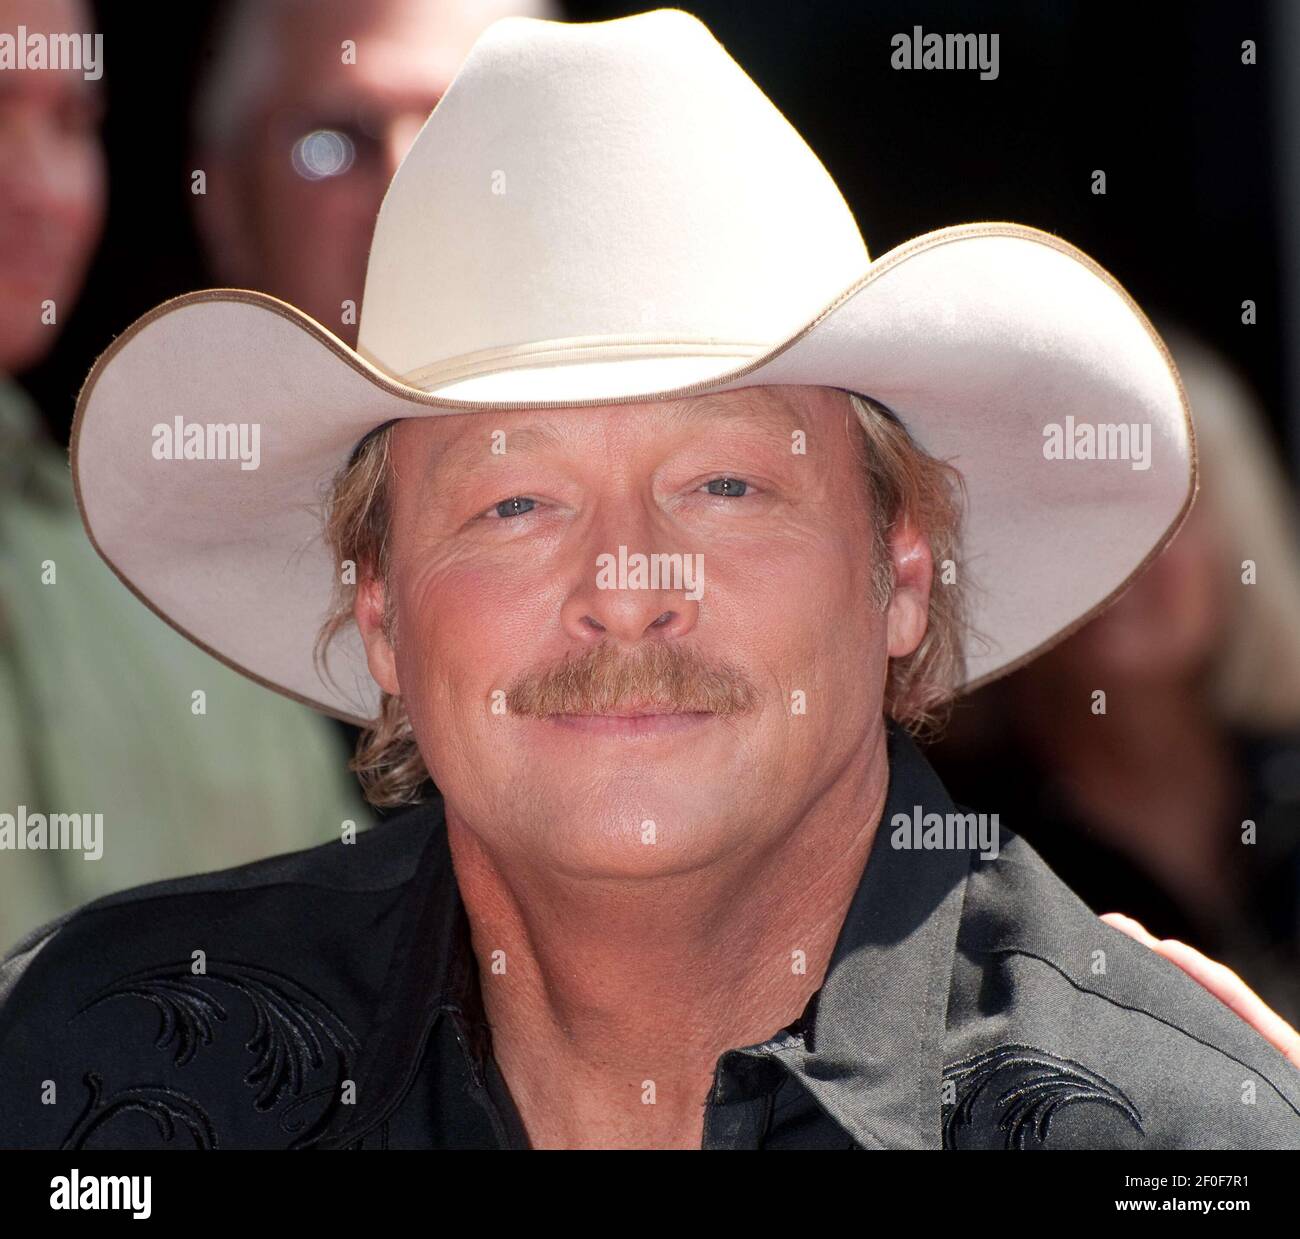 ALAN JACKSON WIFE DAUGHTERS ALAN JACKSON STAR ON THE HOLLYWOOD WALK OF FAME  HOLLYWOOD LOS ANGELES CA 16 April 2010 Stock Photo - Alamy